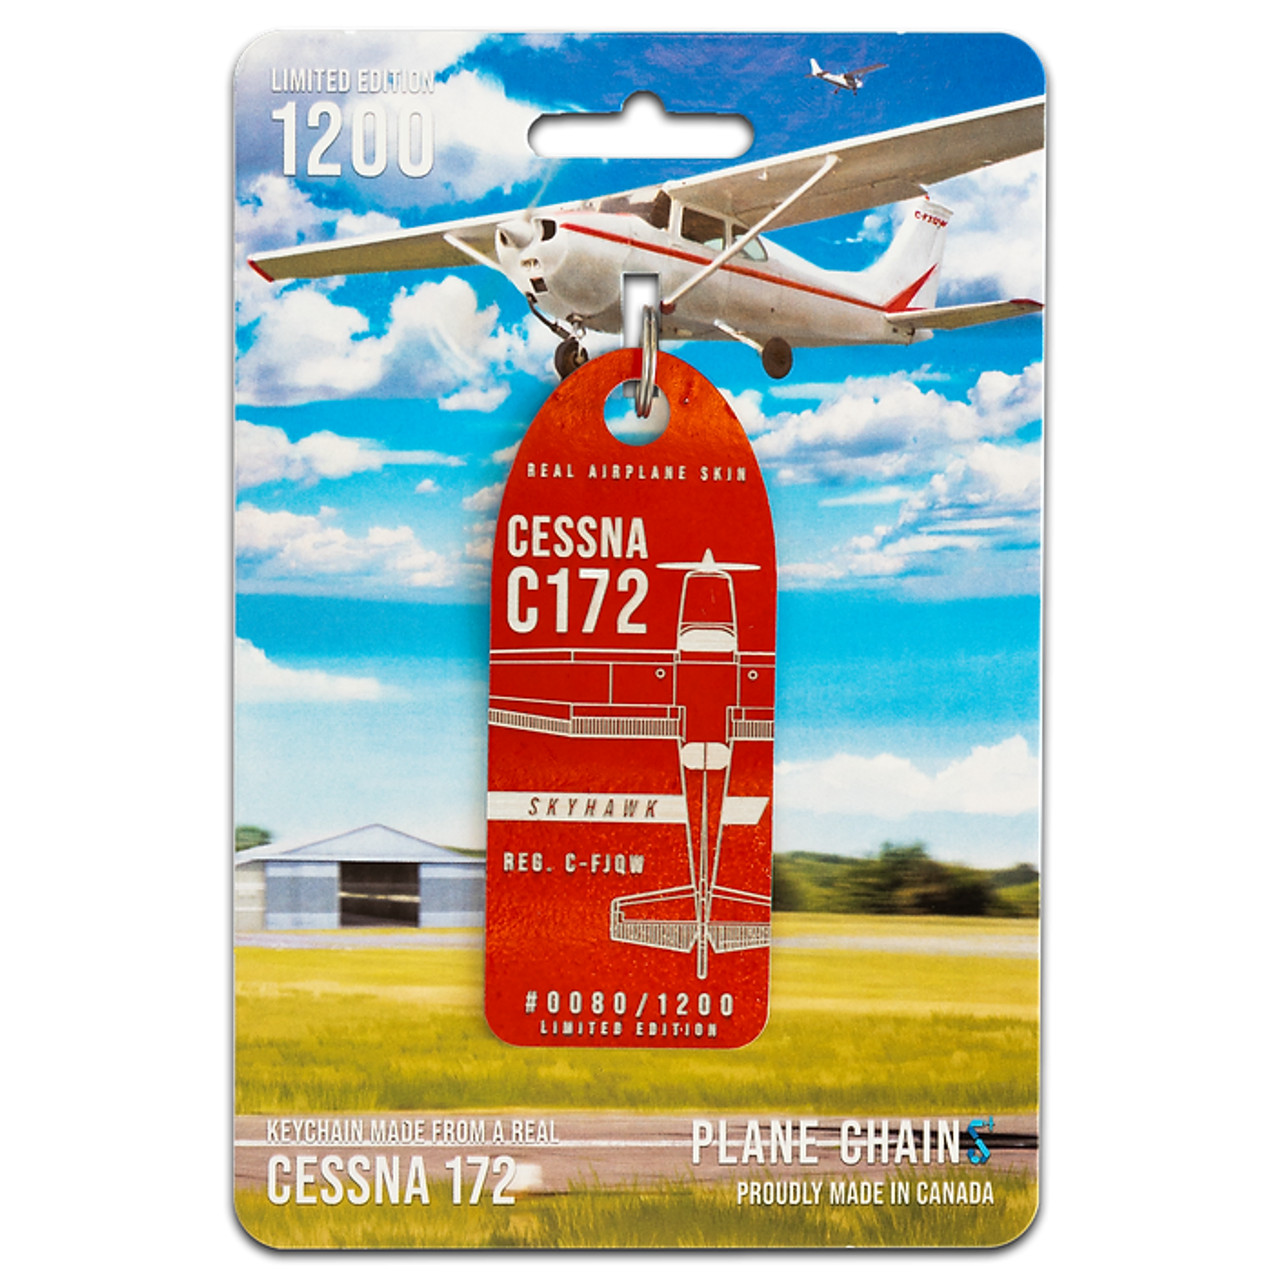 Plane Chains Cessna 172 - White/Red Combo